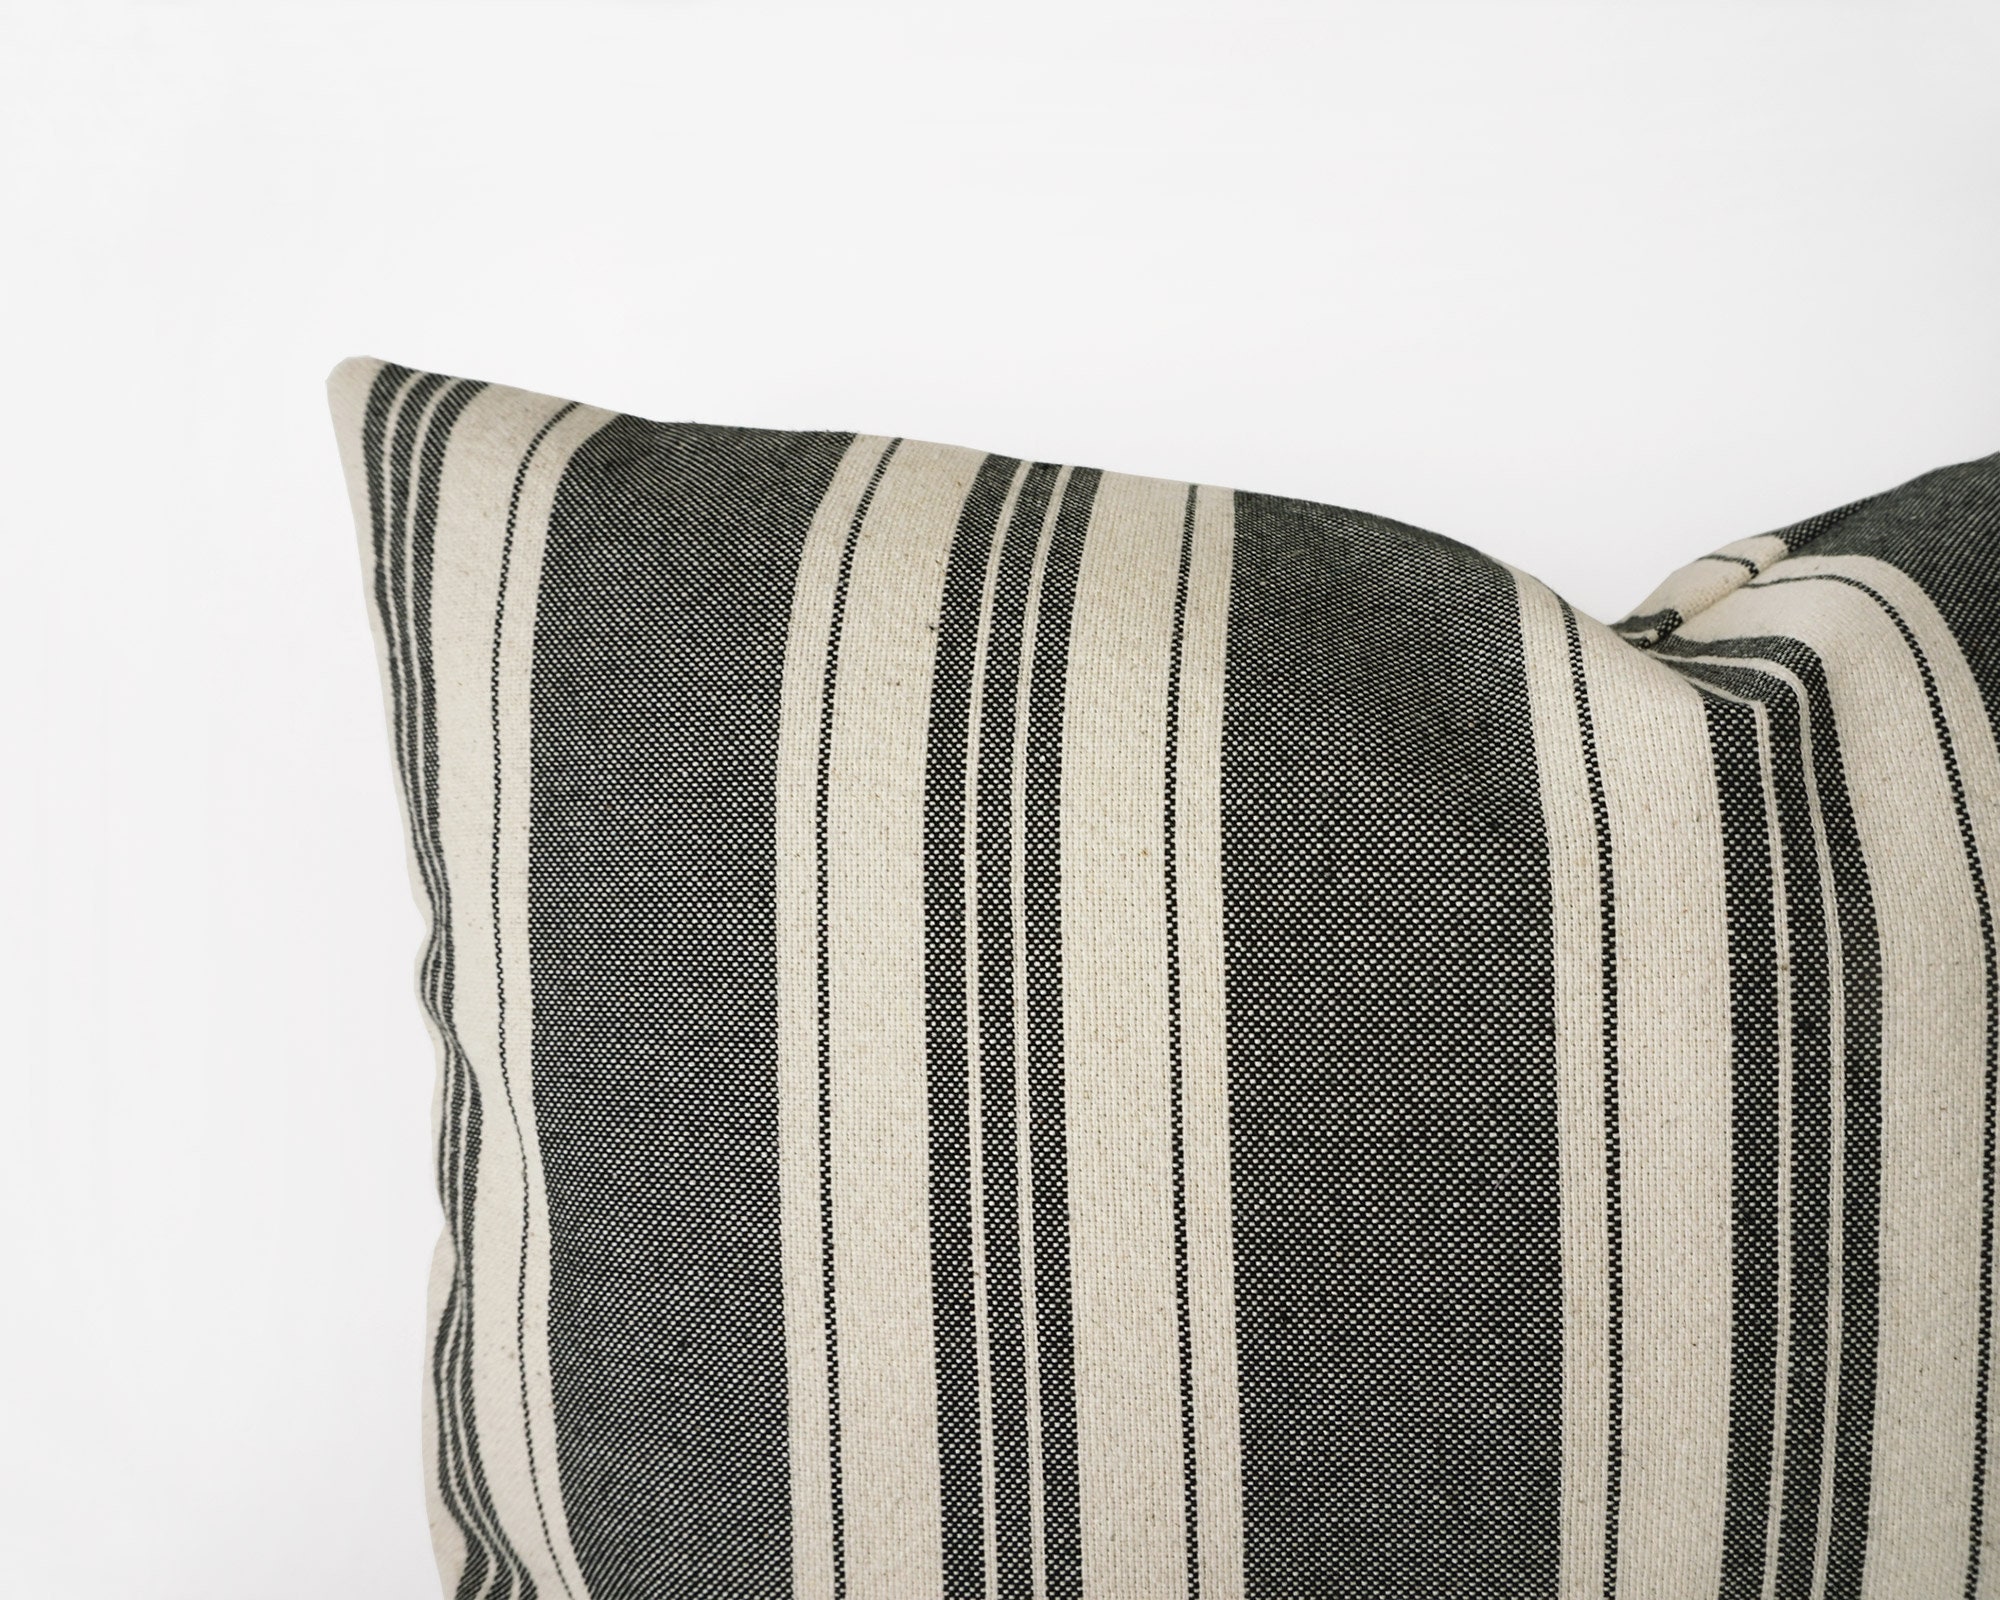 Striped Charcoal Black and Beige Decorative Pillow Cover - Etsy